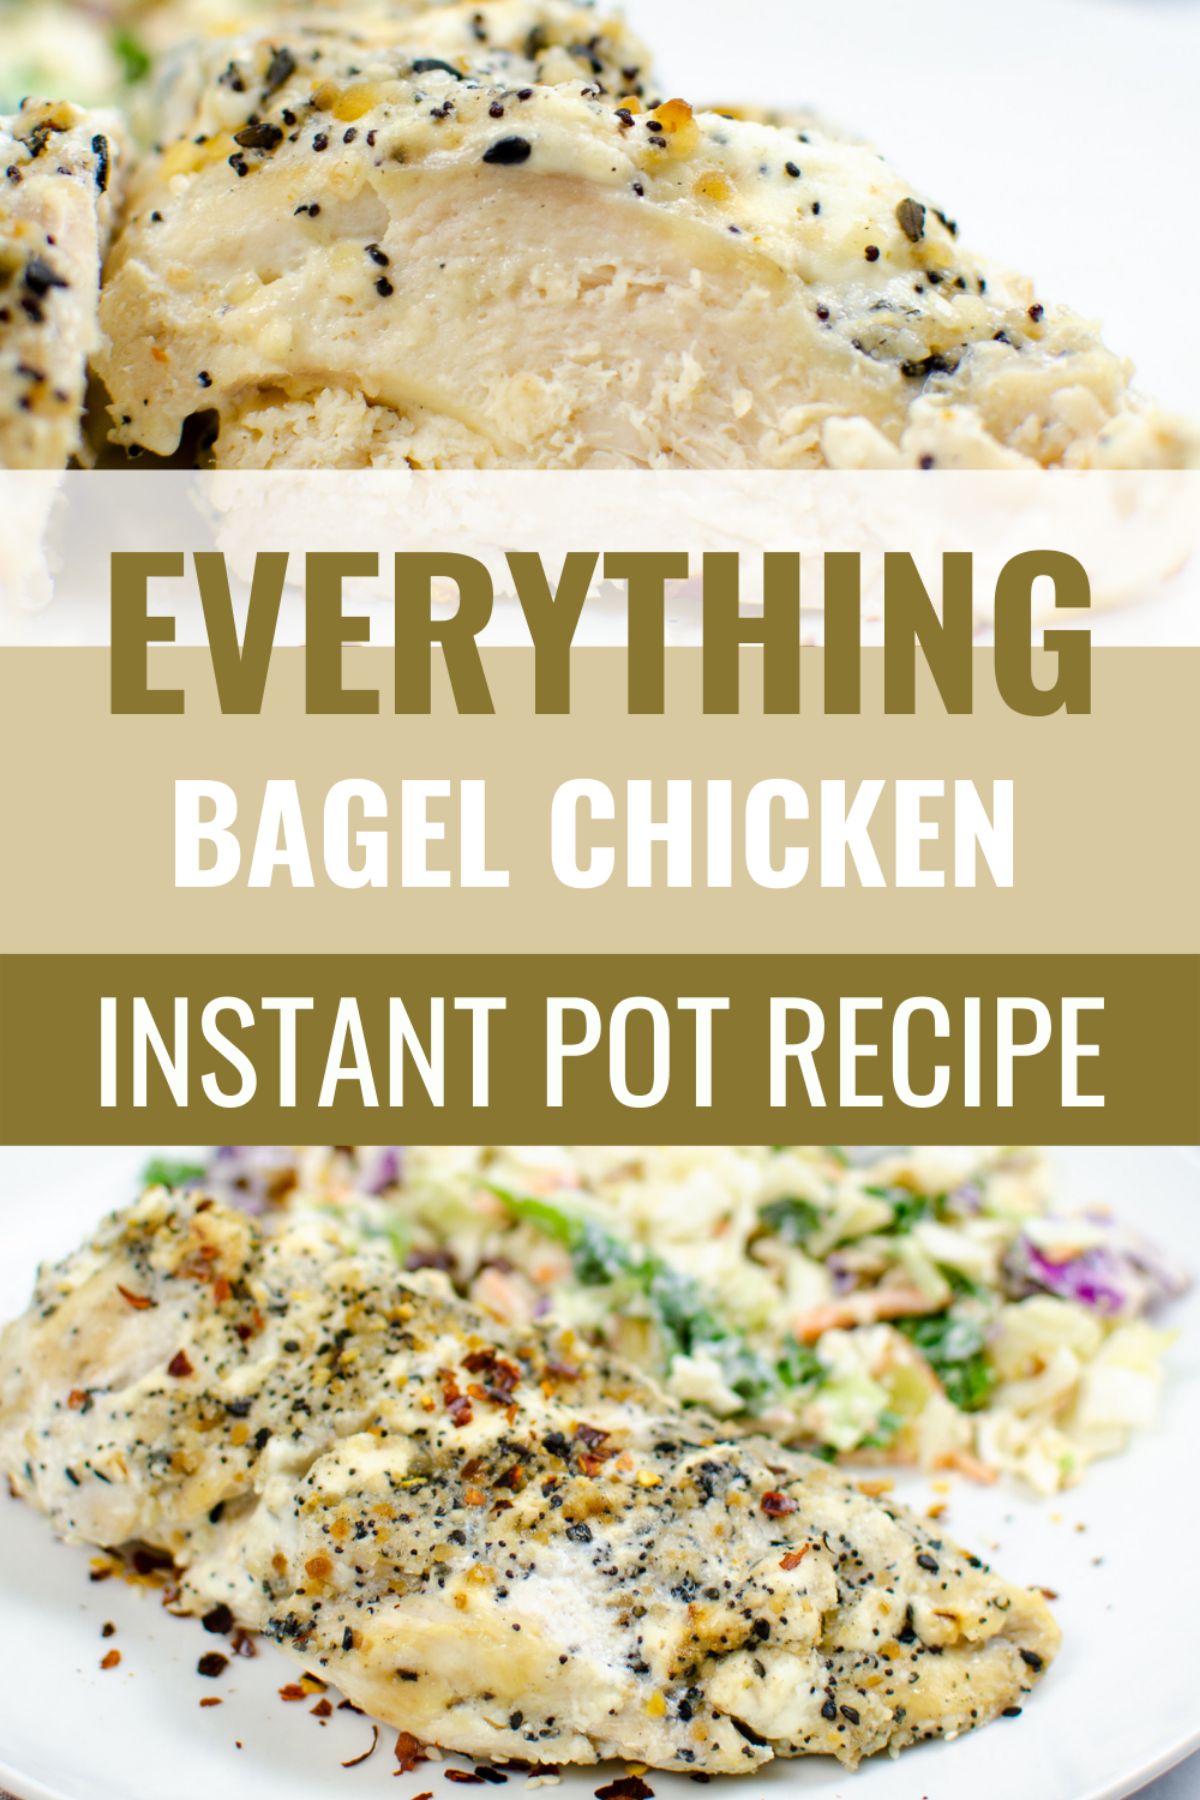 Instant Pot Cream Cheese Chicken is an easy recipe that needs a few ingredients & less than an hour to make. It’s keto & low-carb friendly. #instantpot #pressurecooker #creamcheesechicken #everythingbagel #chicken via @wondermomwannab